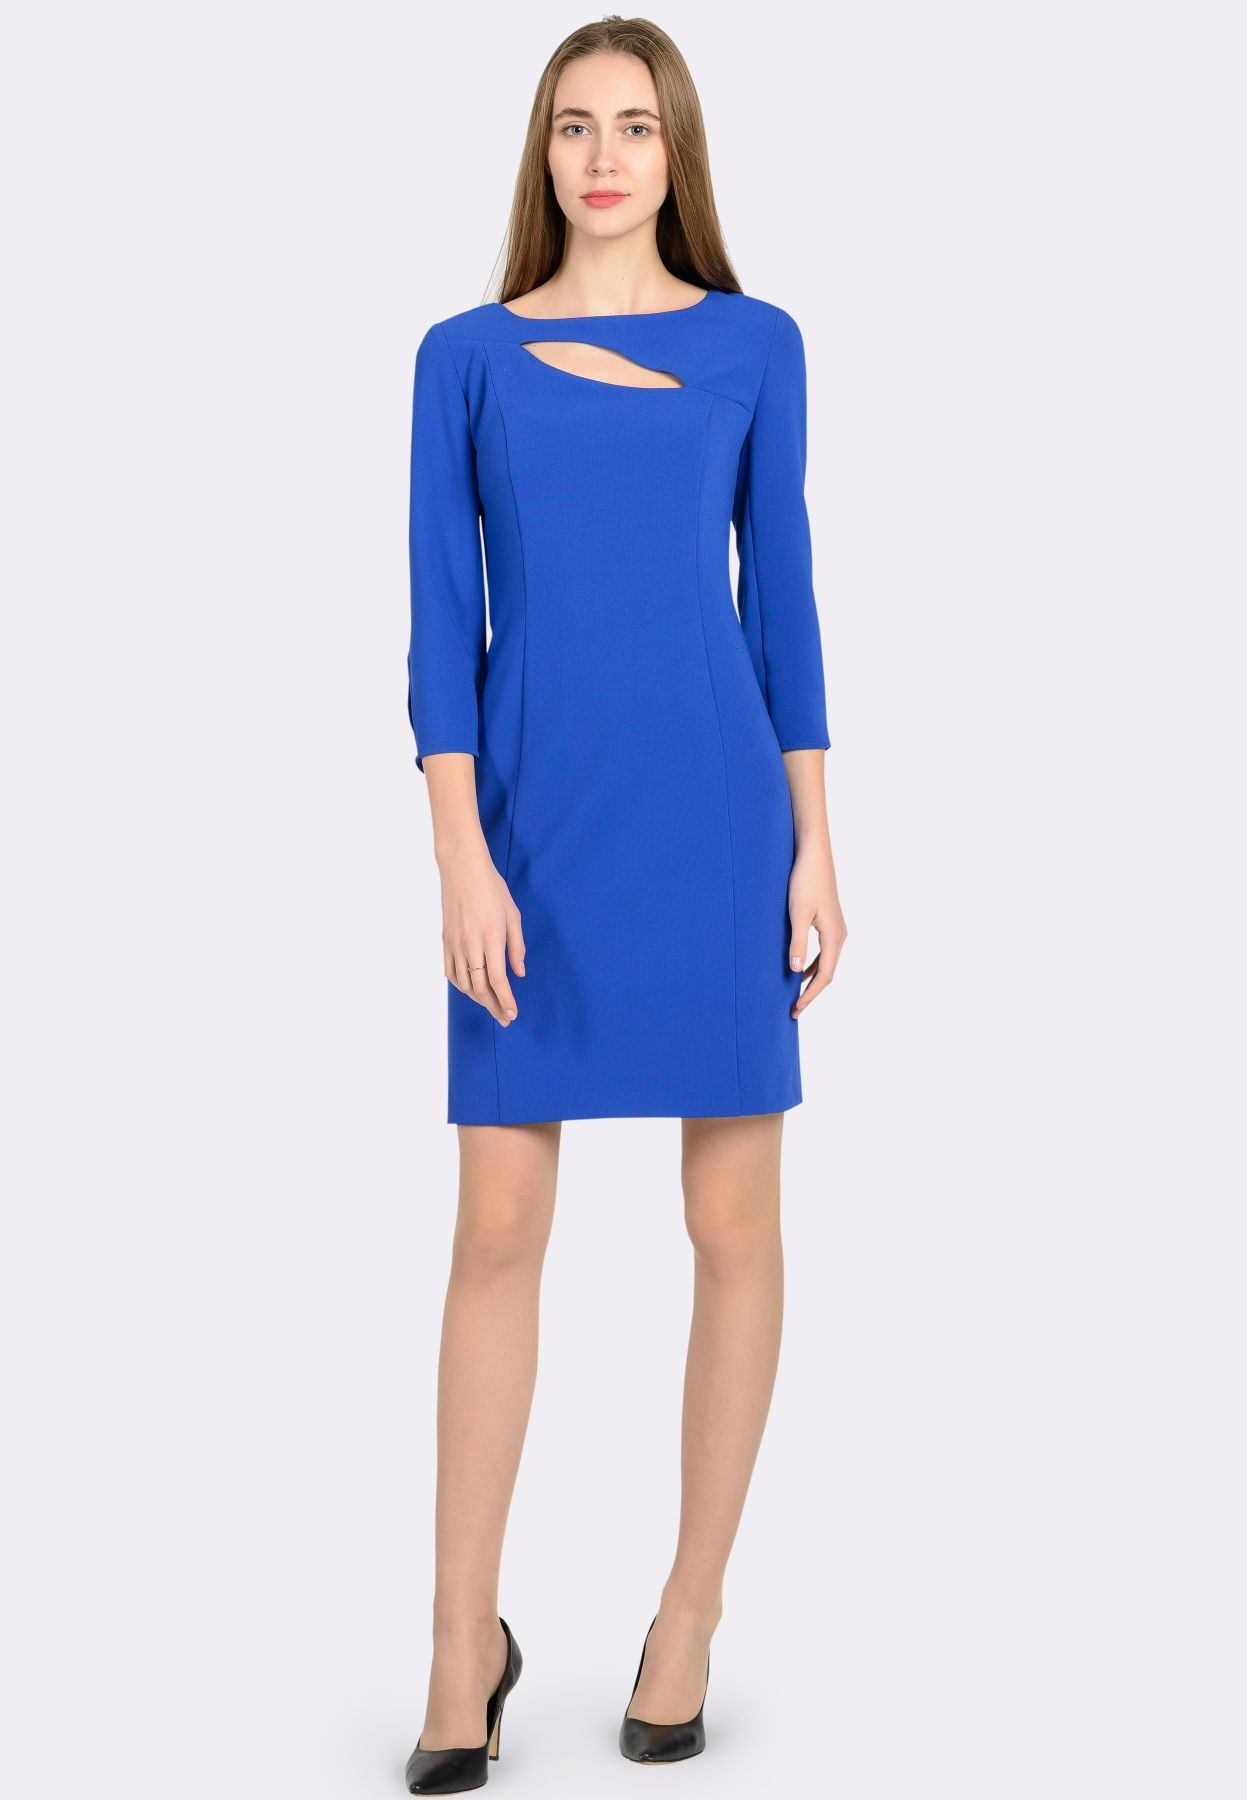 Sheath dress is bright blue with curved cutouts 5566